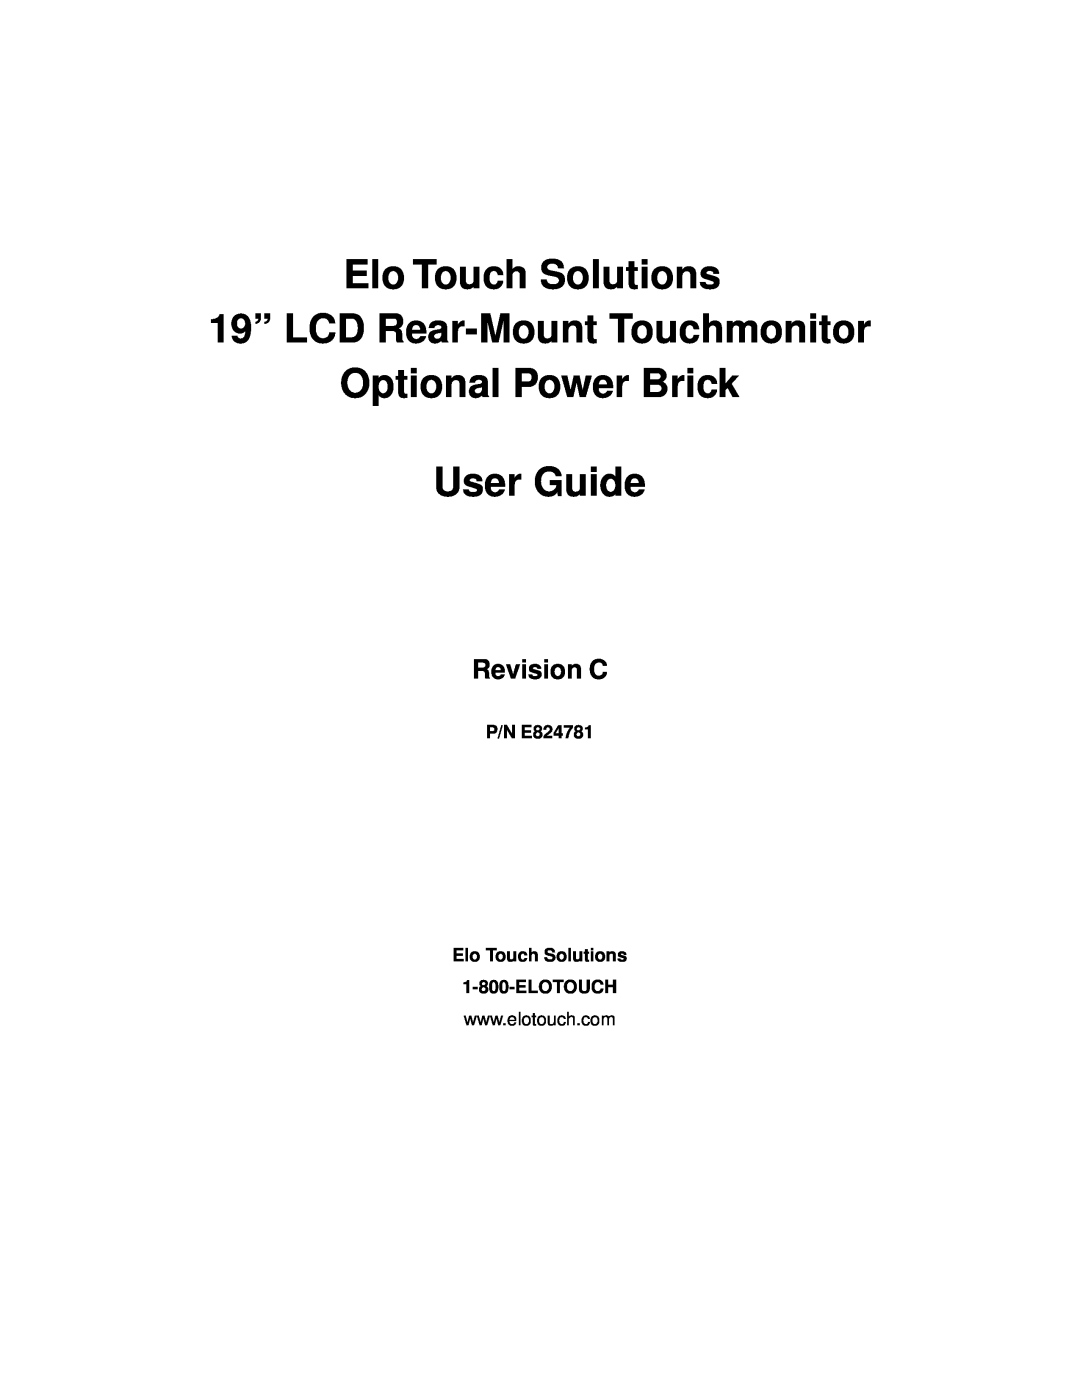 Elo TouchSystems 1939L Elo Touch Solutions 19” LCD Rear-Mount Touchmonitor, Optional Power Brick User Guide, Revision C 